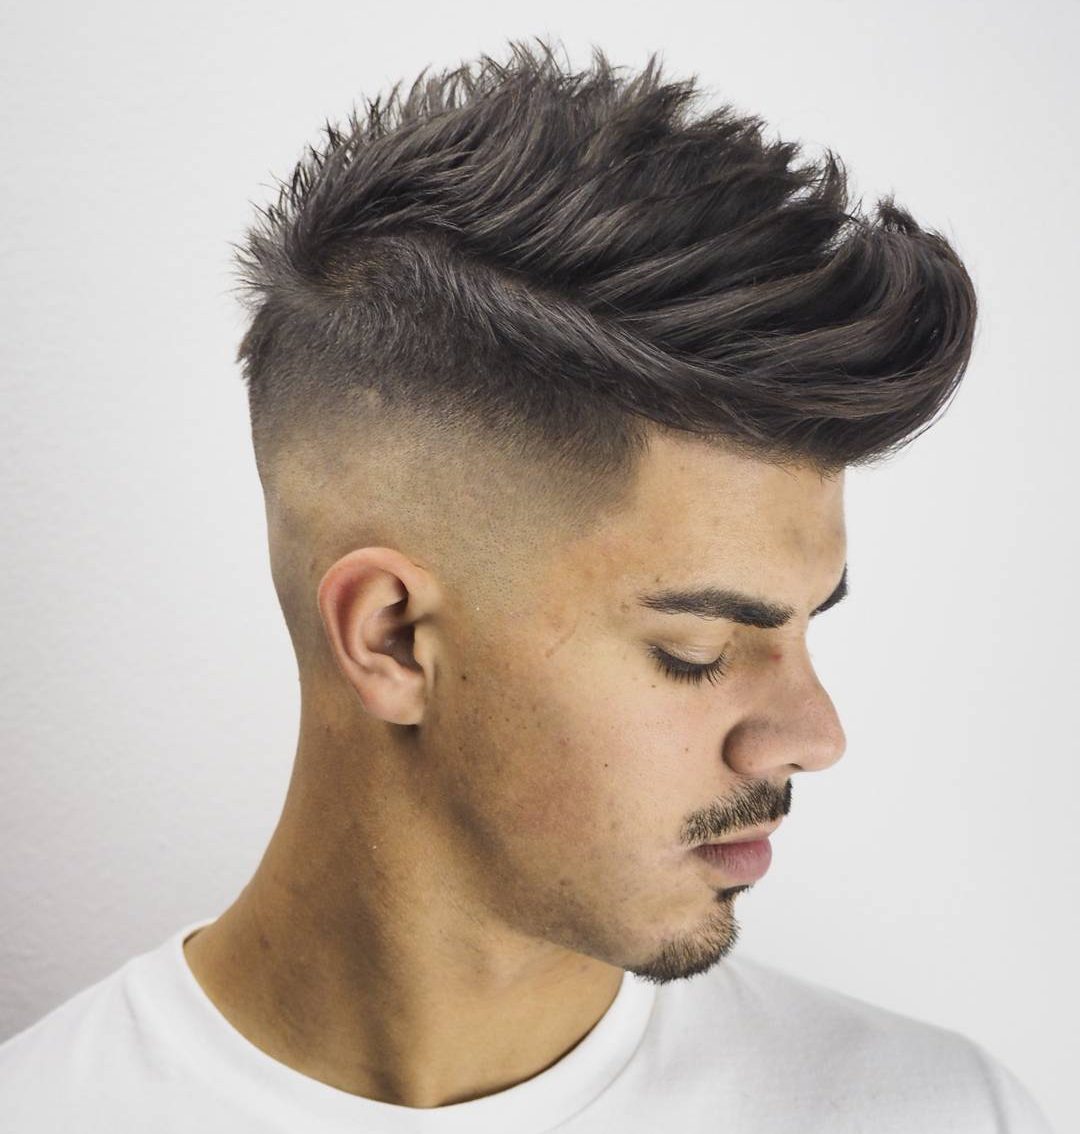 80 new hairstyles for men (2019 update)